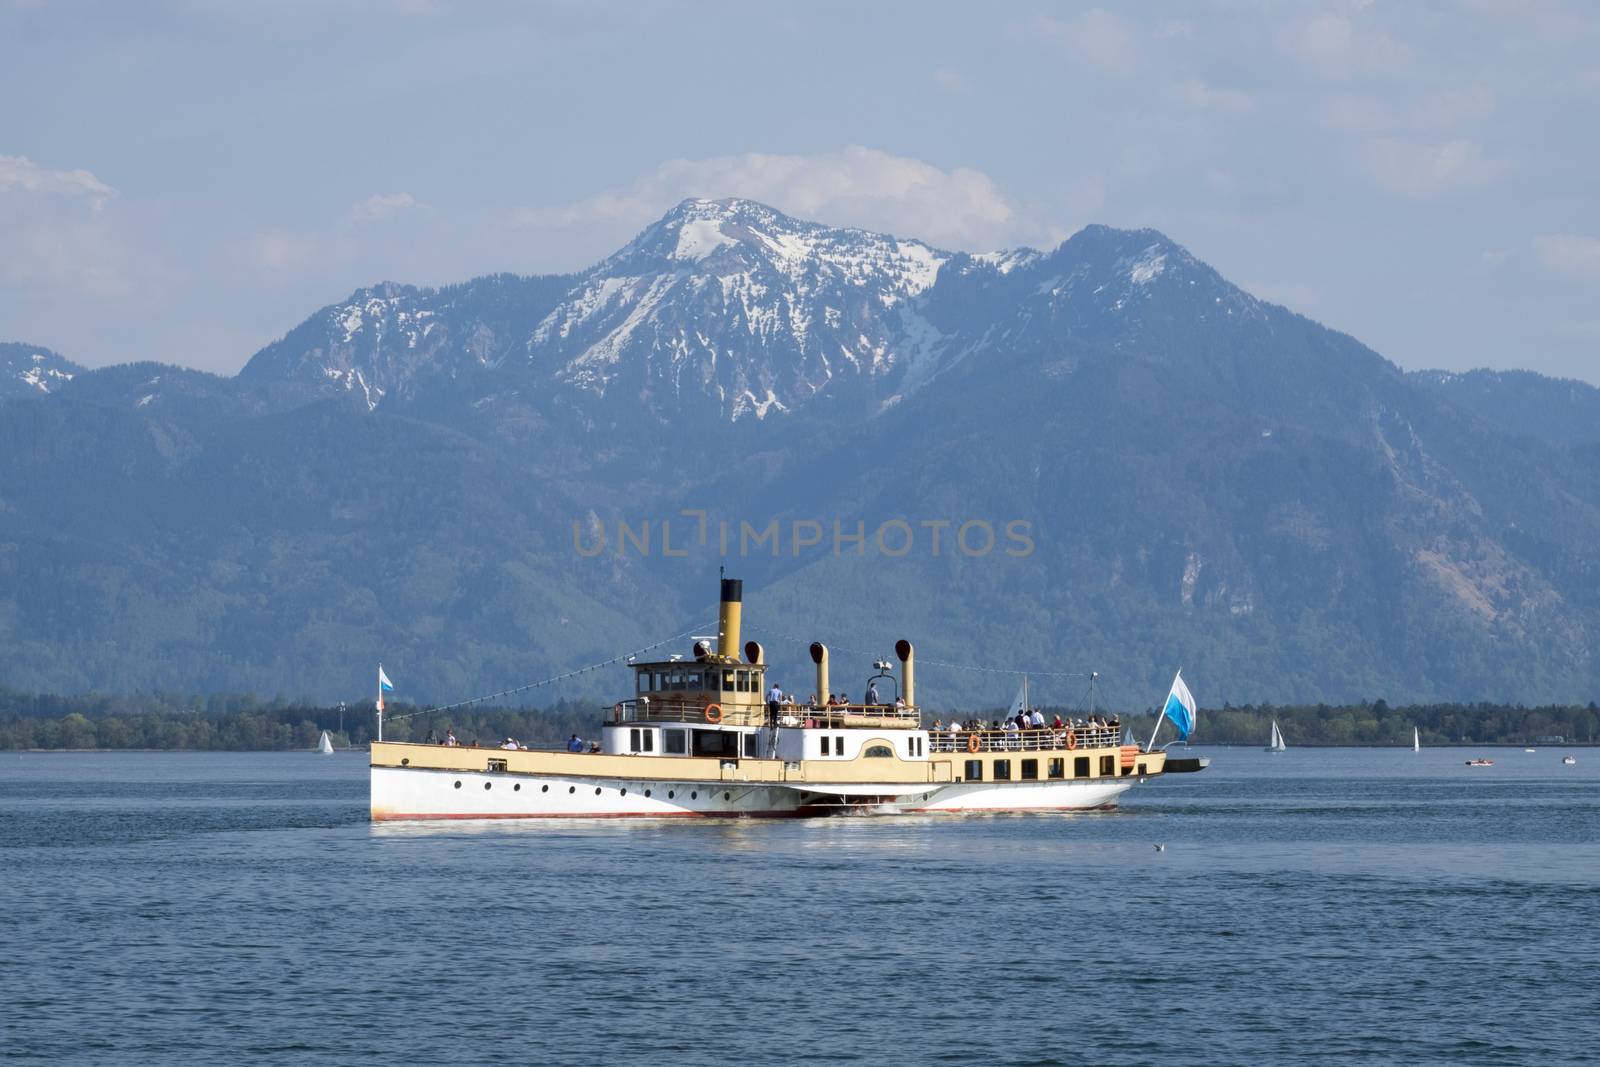 Boat on Chiemsee in Bavaria, Germany in spring